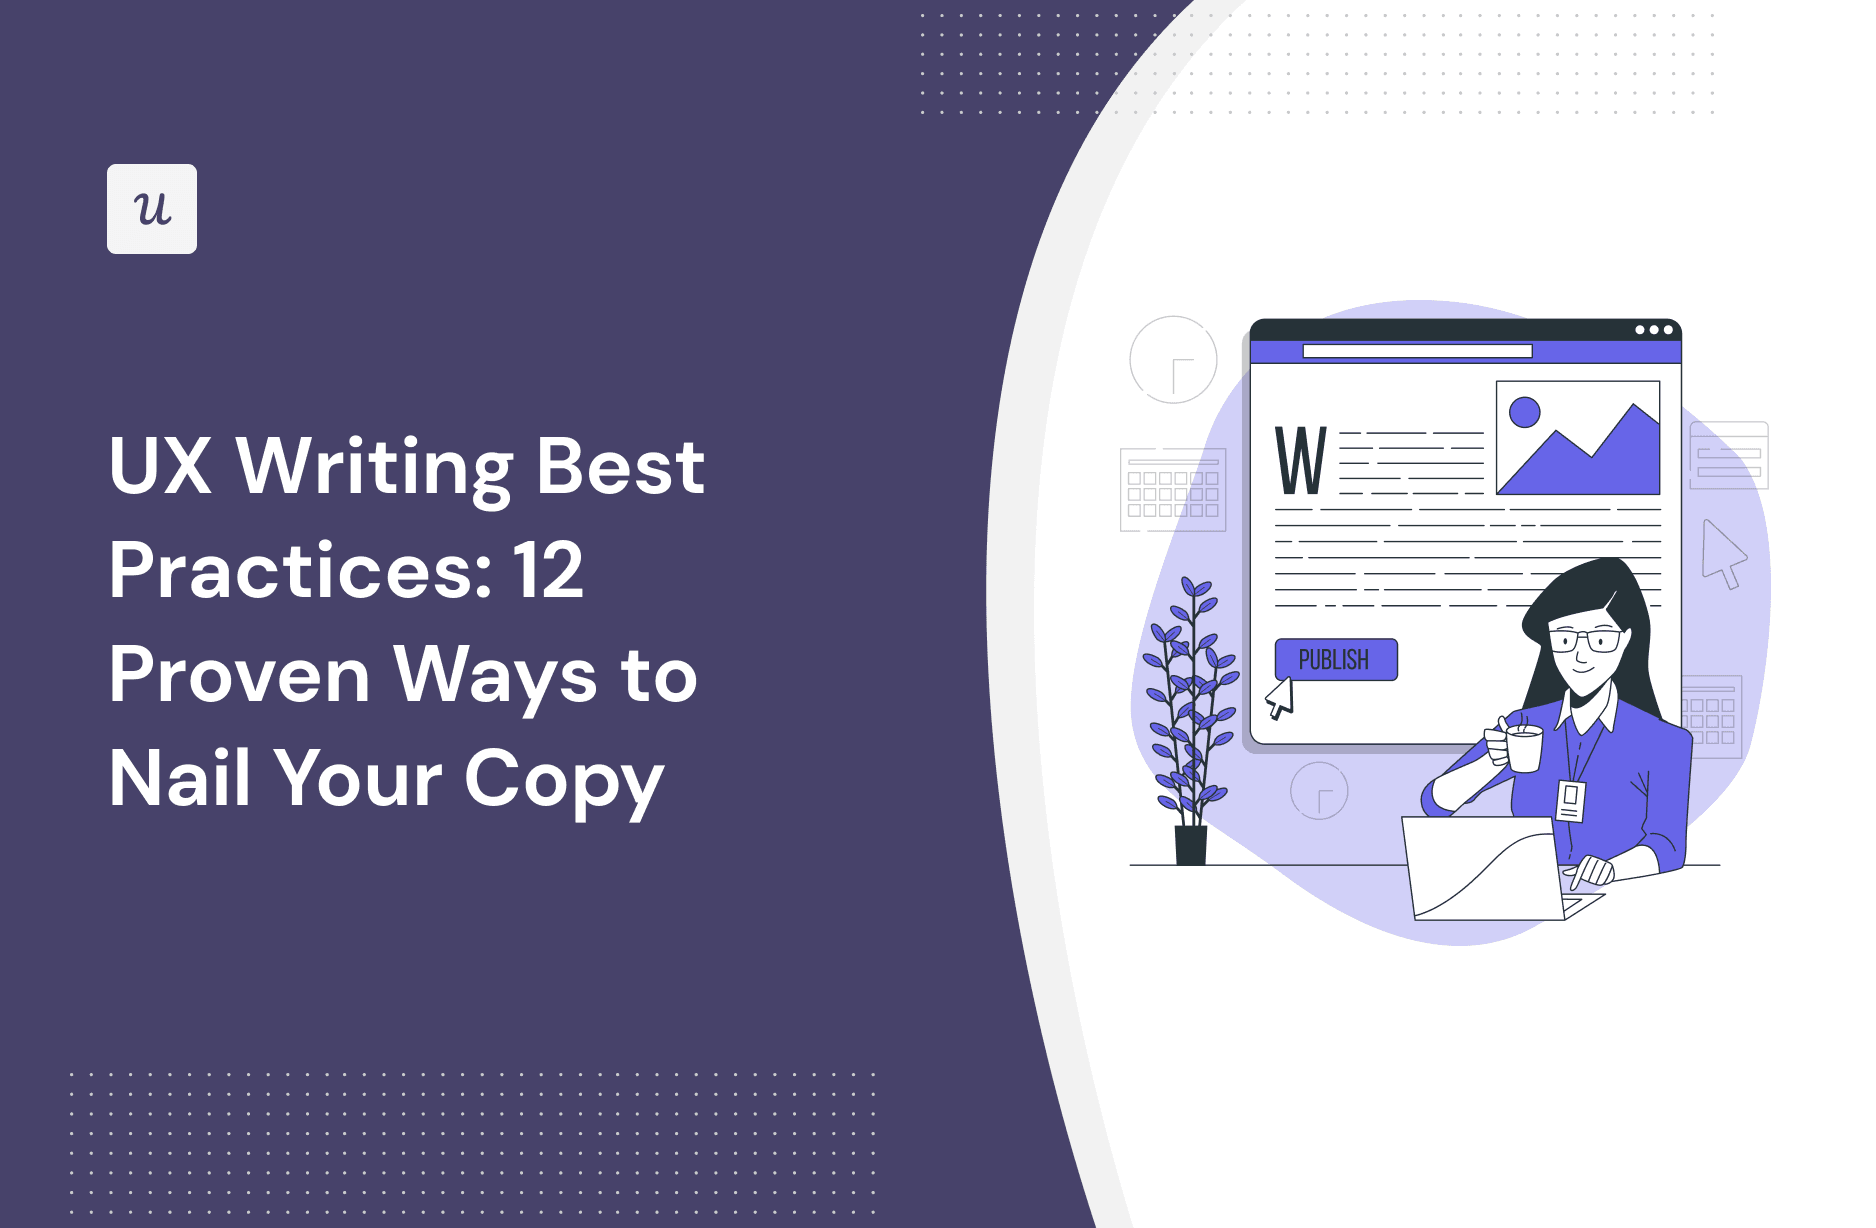 UX Writing Best Practices: 12 Proven Ways to Nail Your Copy cover